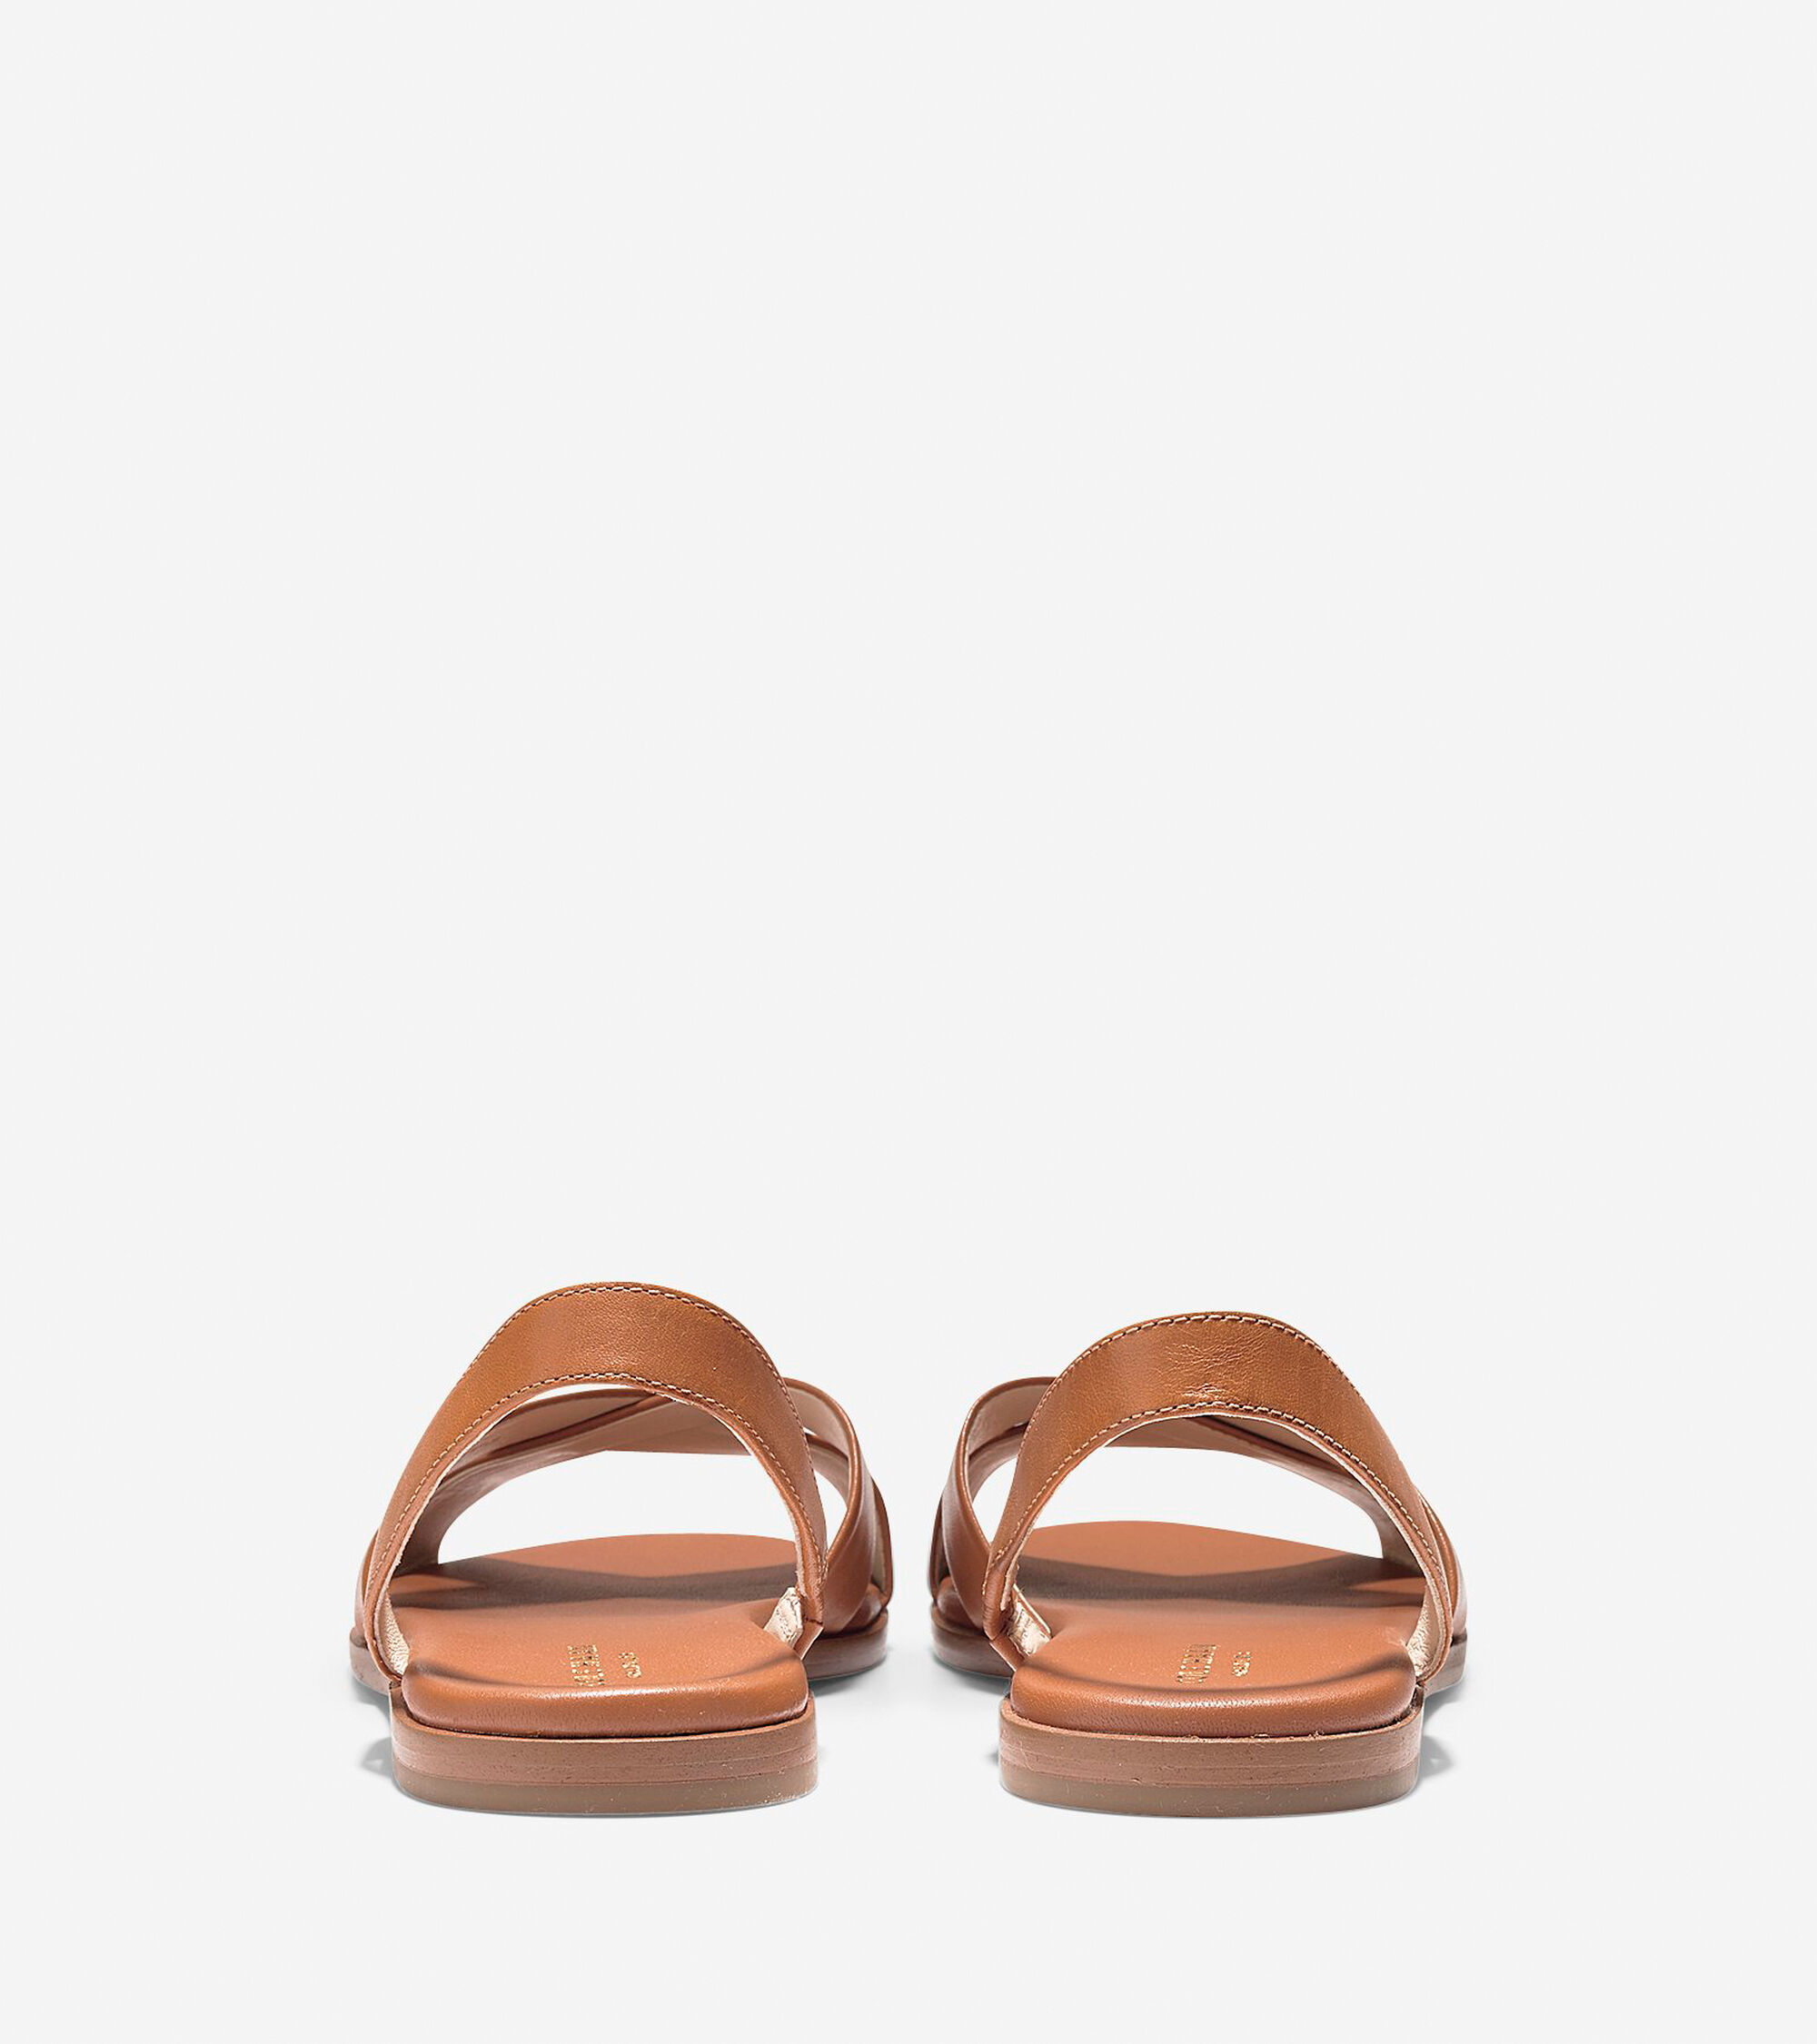 Women's Anica Sling Sandals in Pecan Leather | Cole Haan